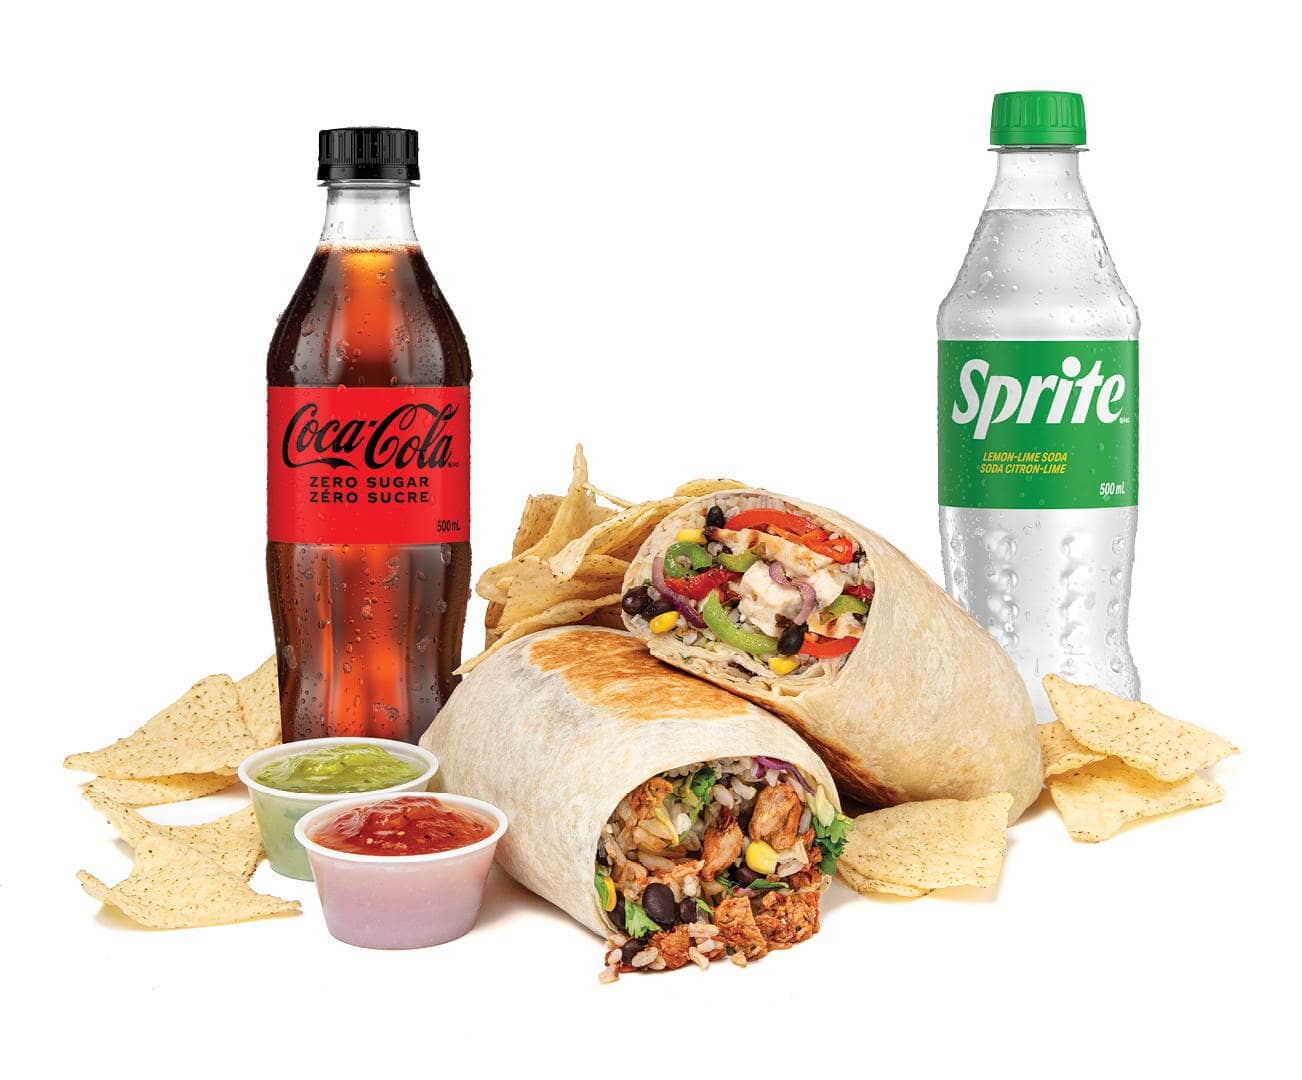 Burritos, Coca-Cola and Sprite bottles, chips and salsa